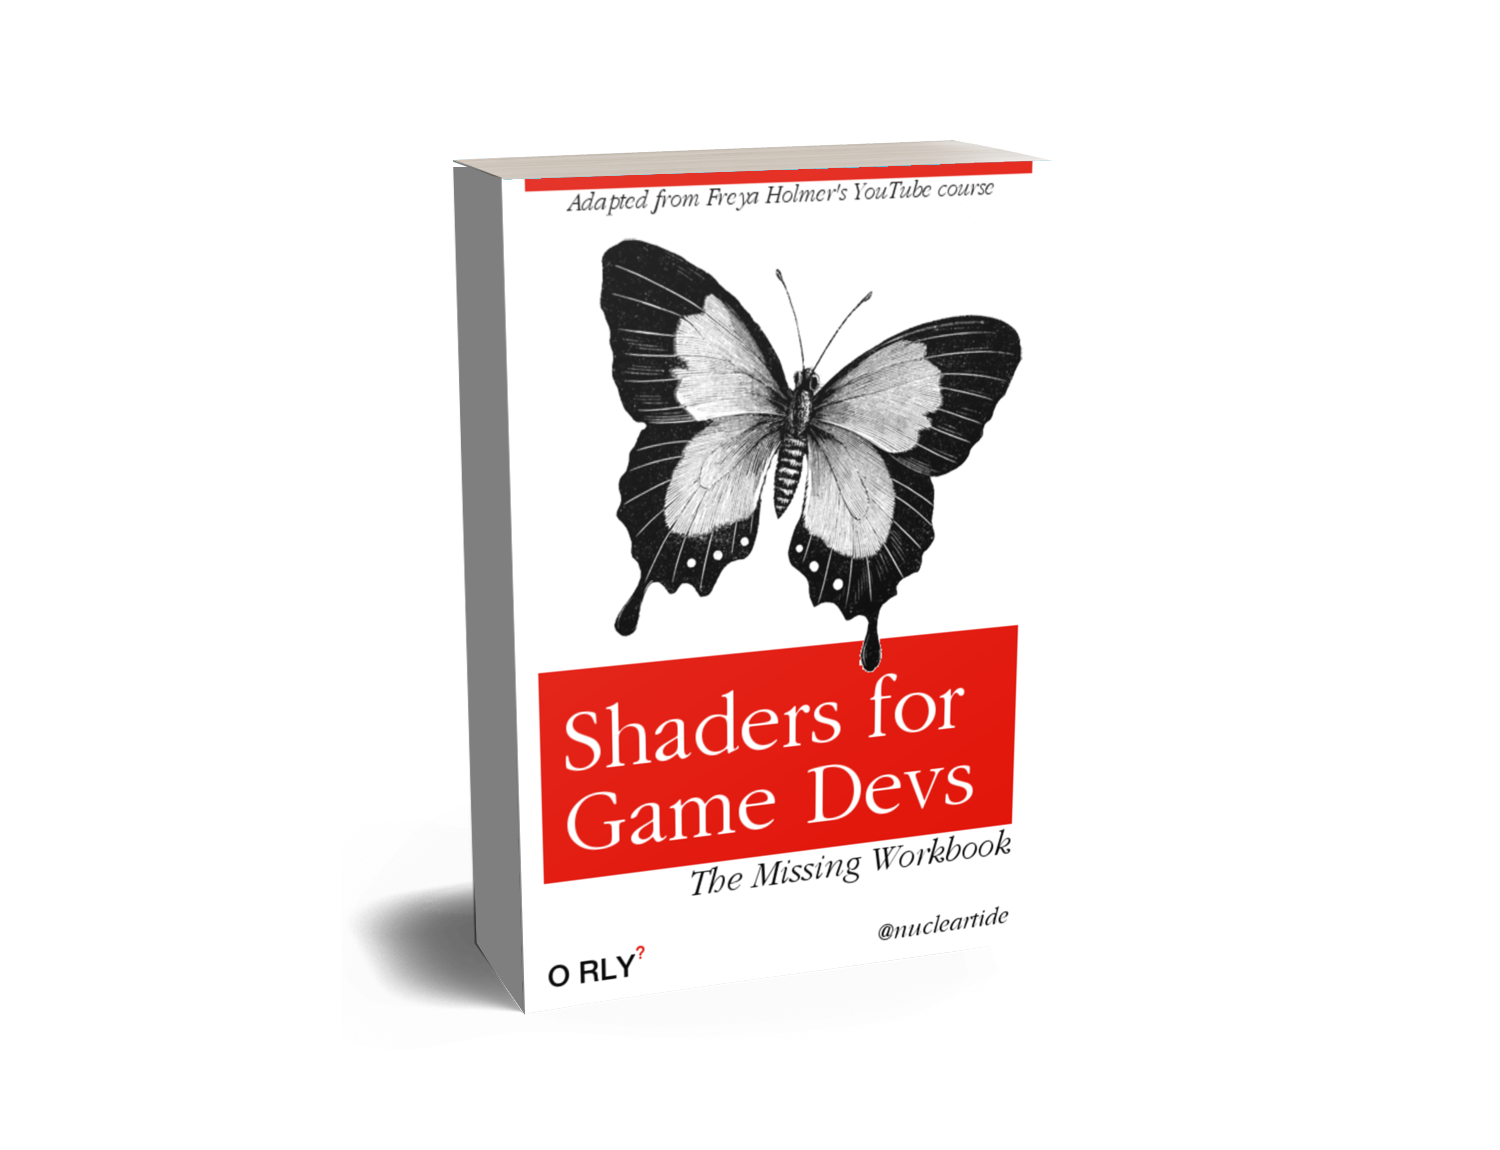 Shaders for Game Devs book cover